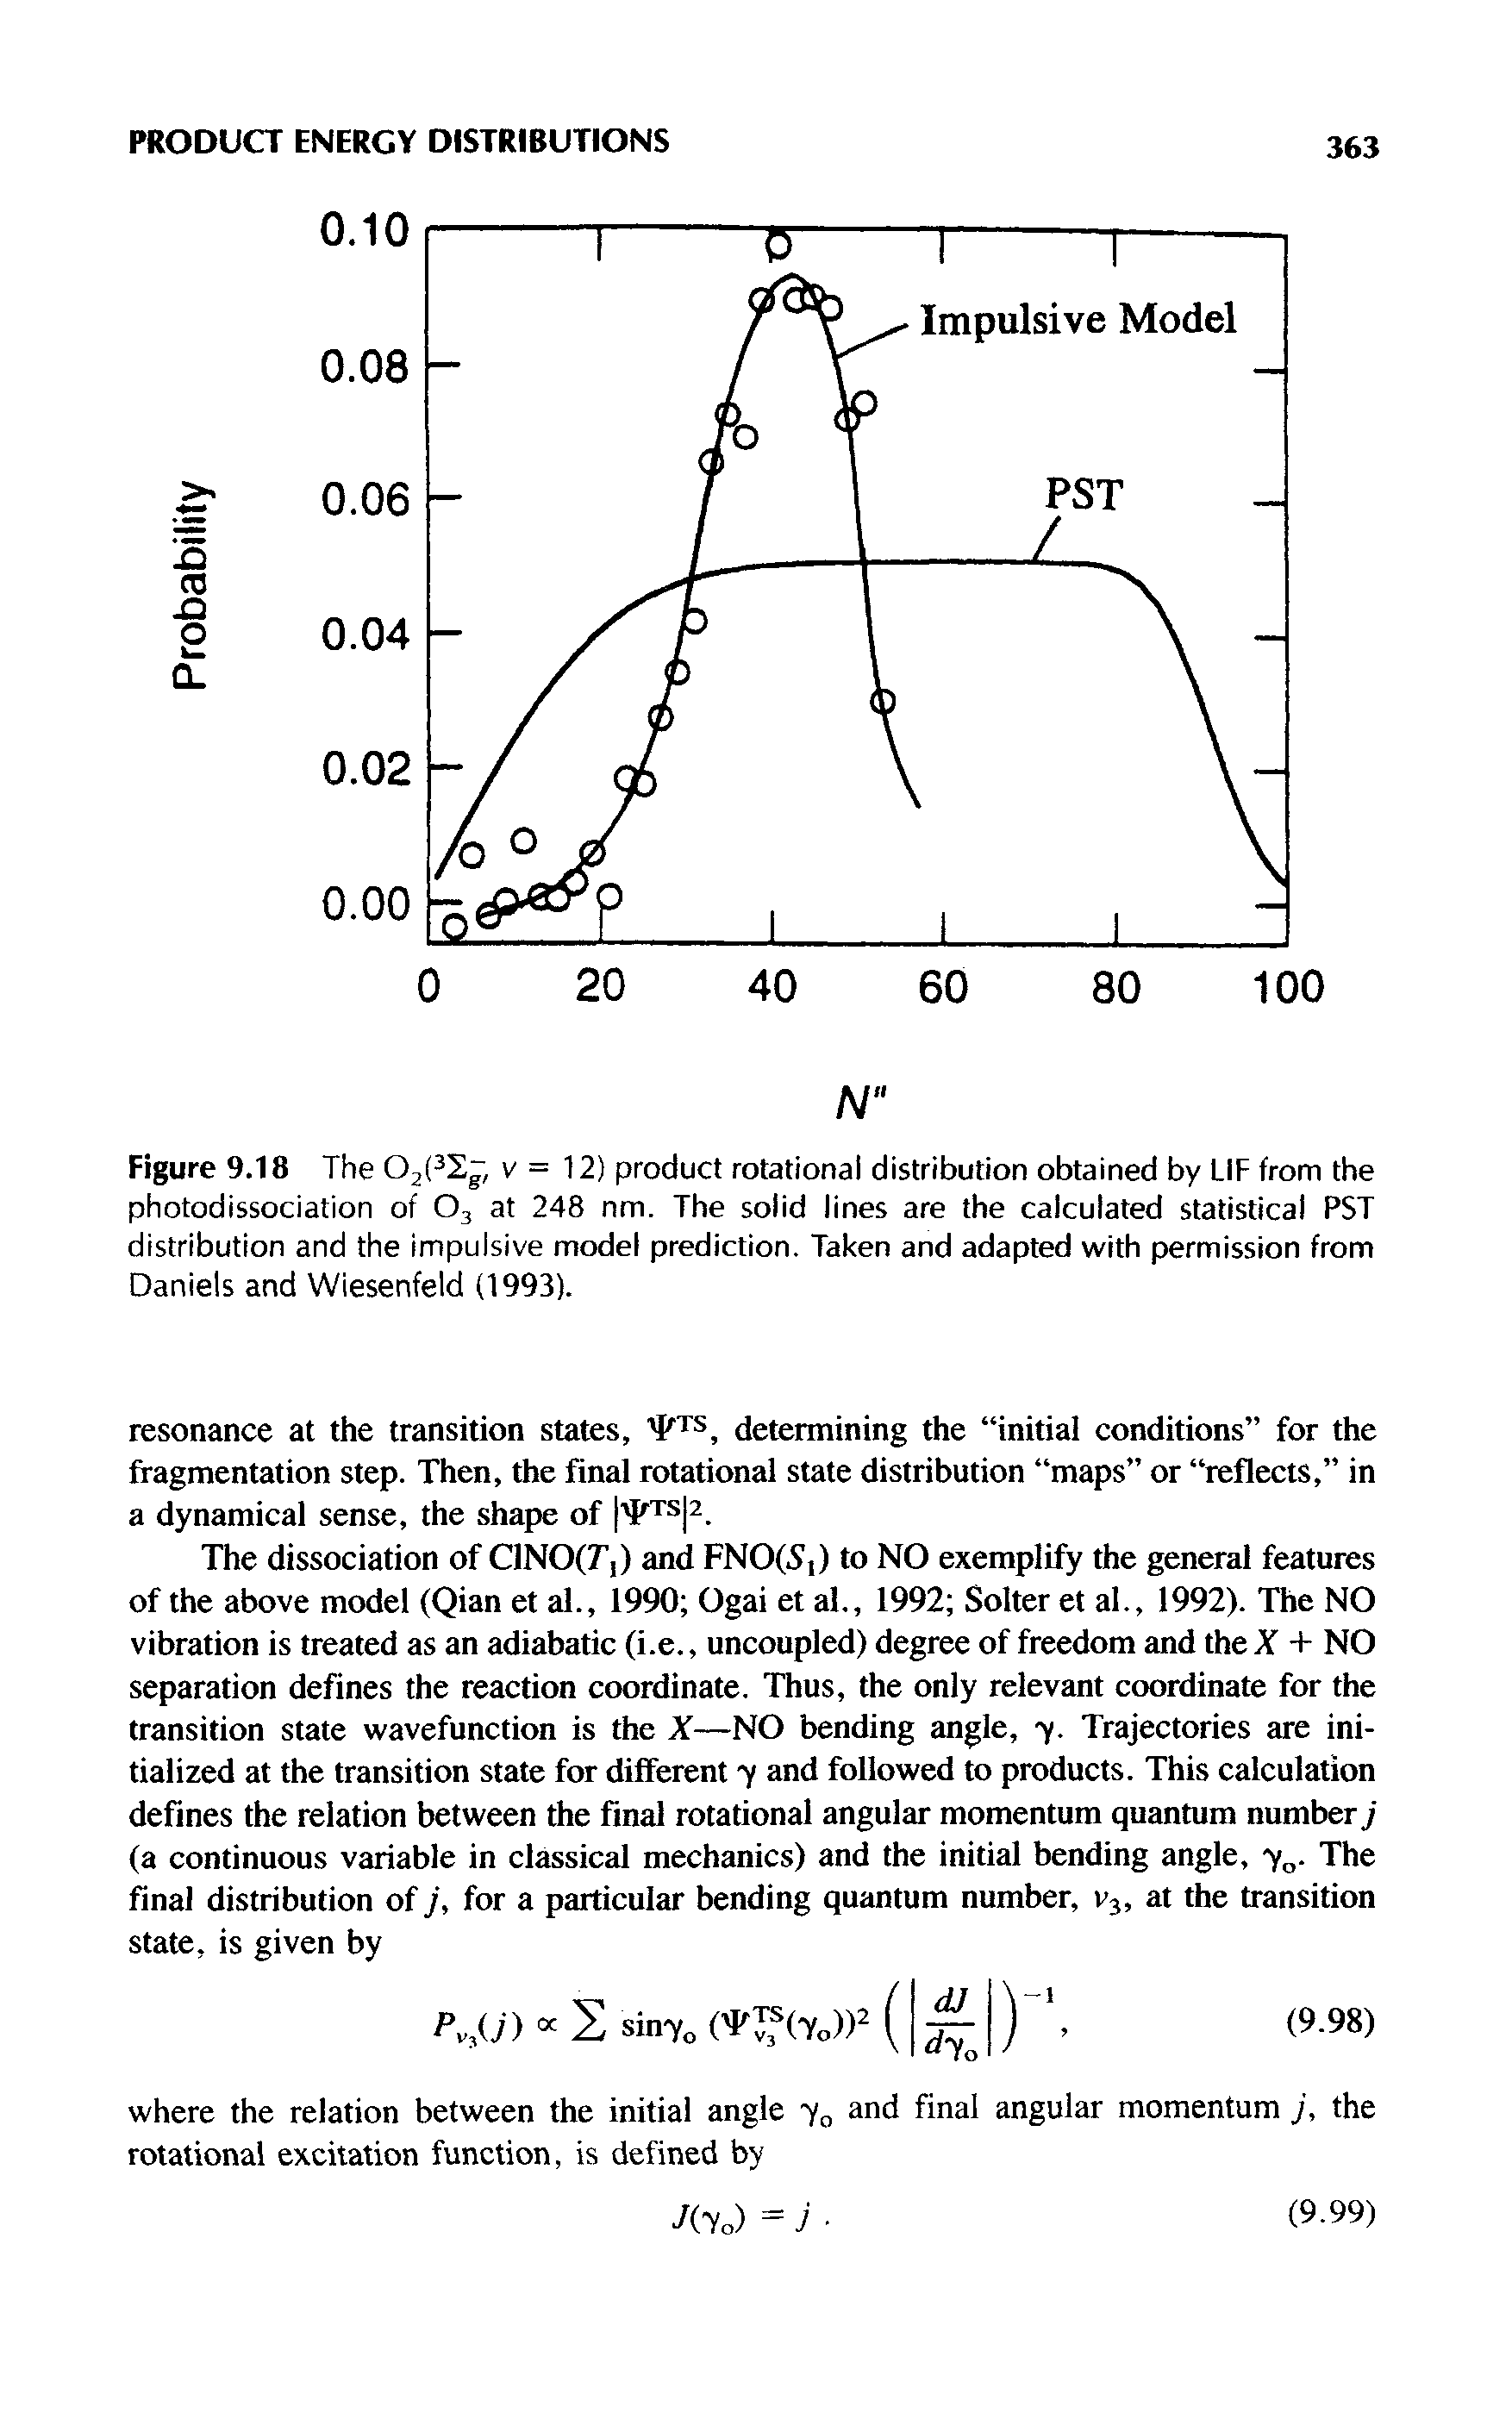 Figure 9.18 The 02( S v = 12) product rotational distribution obtained by LIF from the photodissociation of O3 at 248 nm. The solid lines are the calculated statistical PST distribution and the impulsive model prediction. Taken and adapted with permission from Daniels and Wiesenfeld (1993).